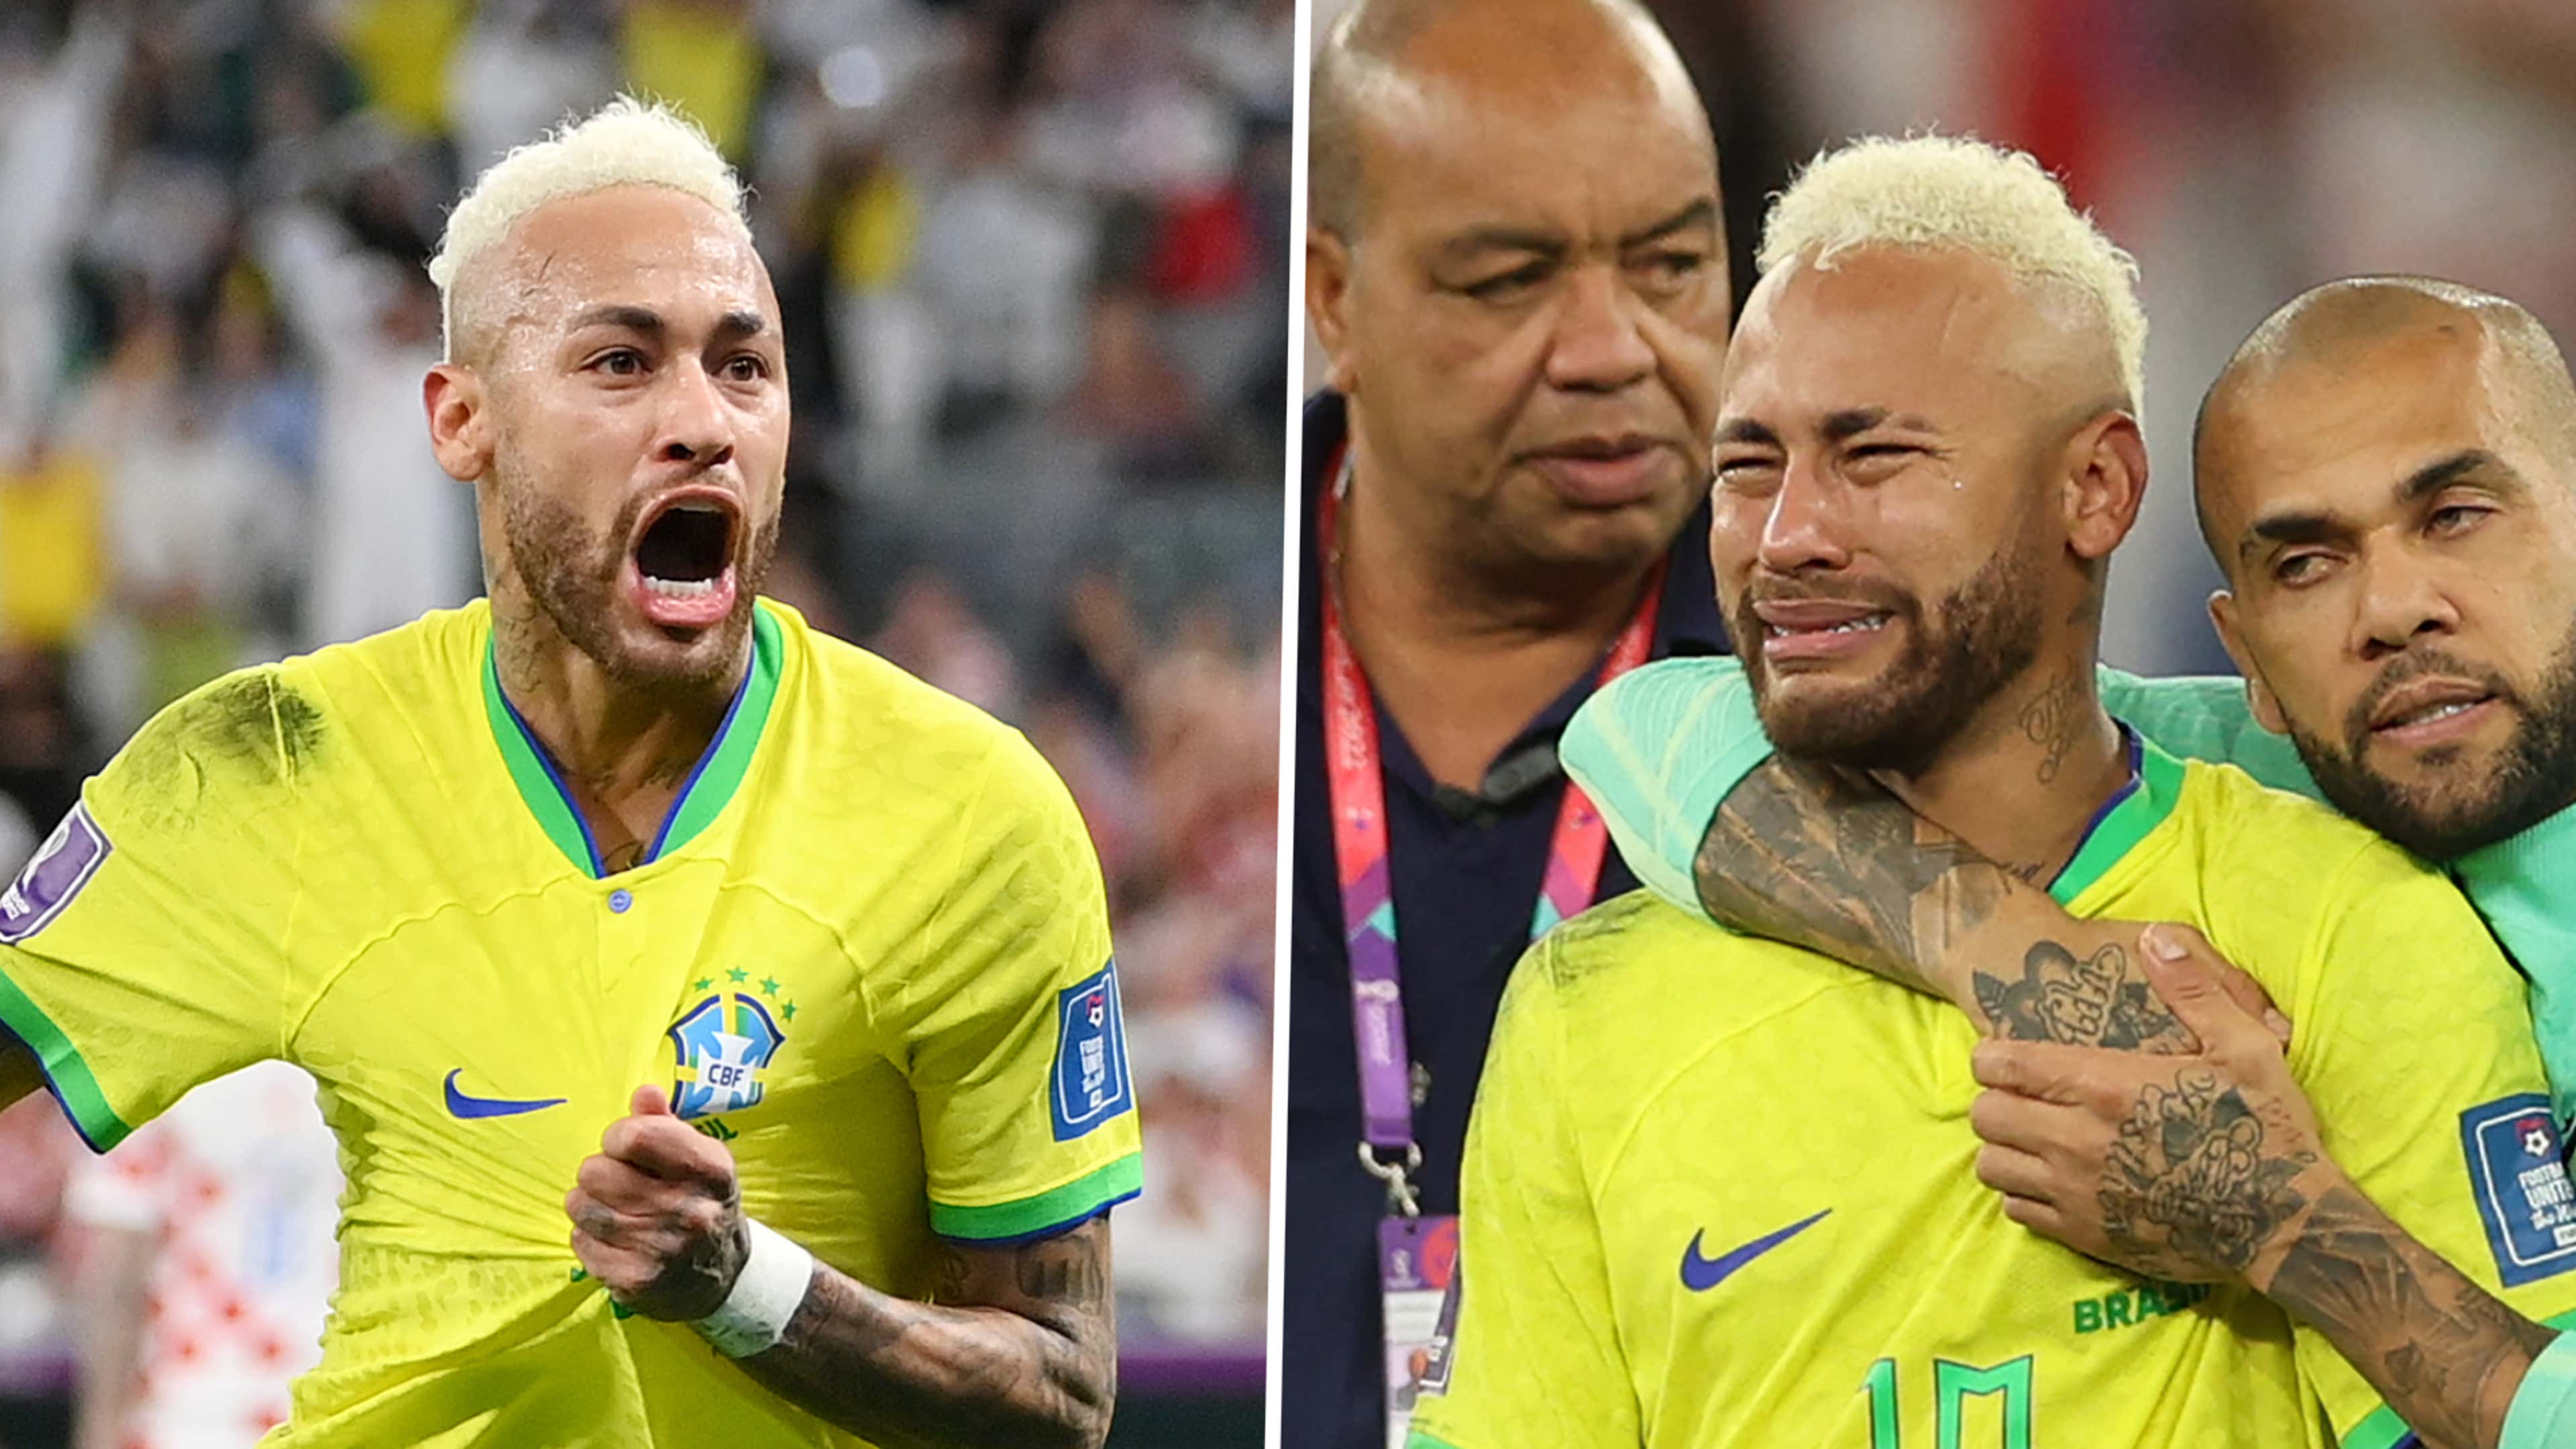 Is this the end for Neymar? From World Cup legend to loser in 10